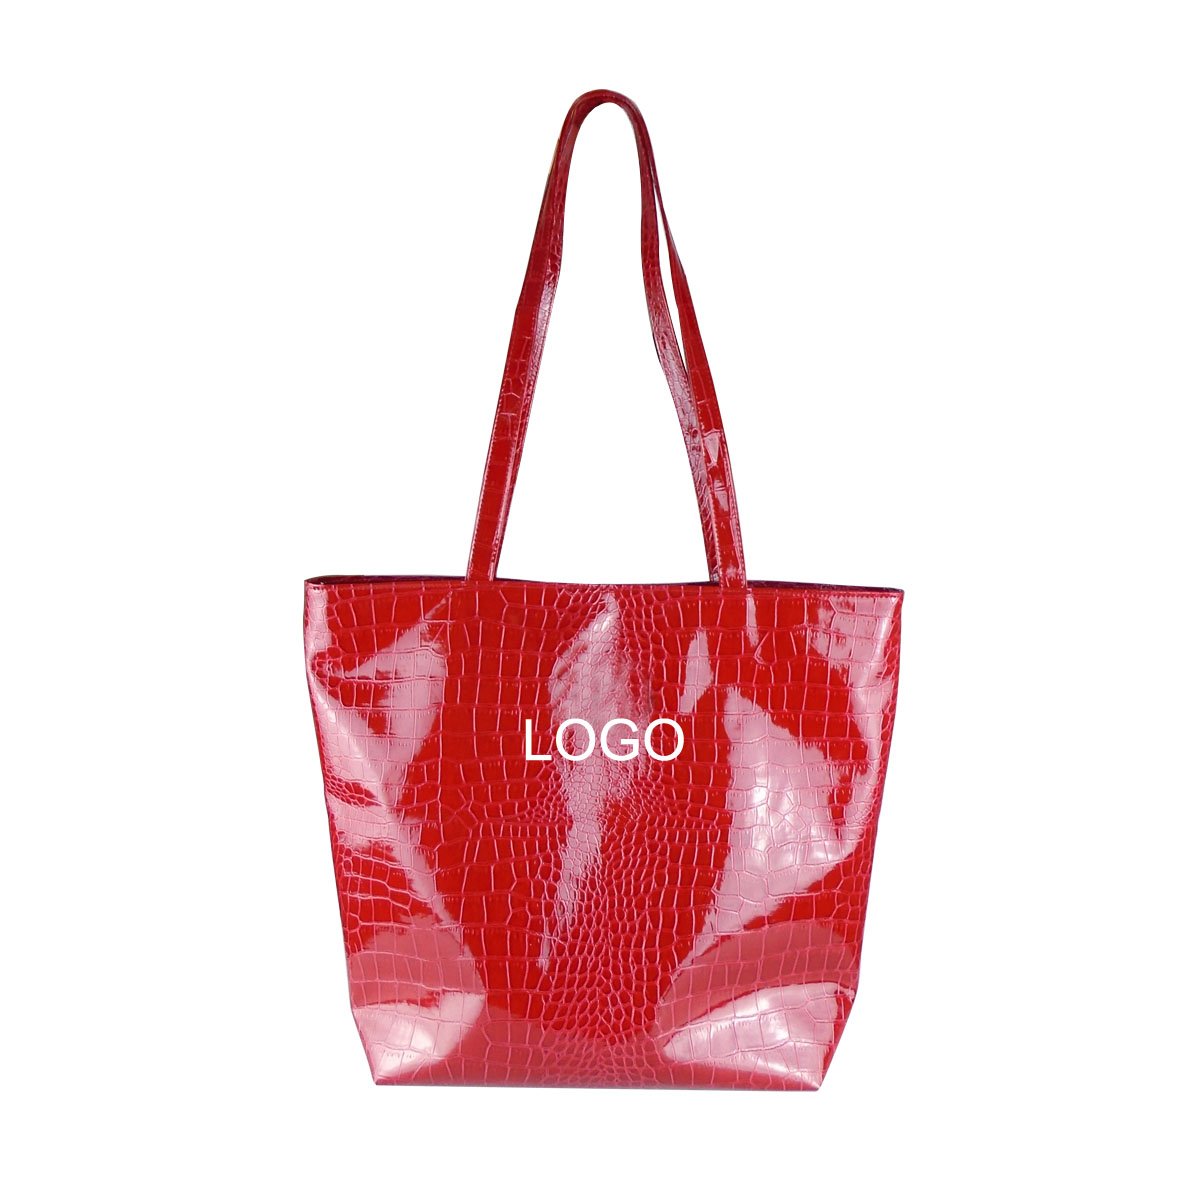 Promotional Lady's PU tote bag